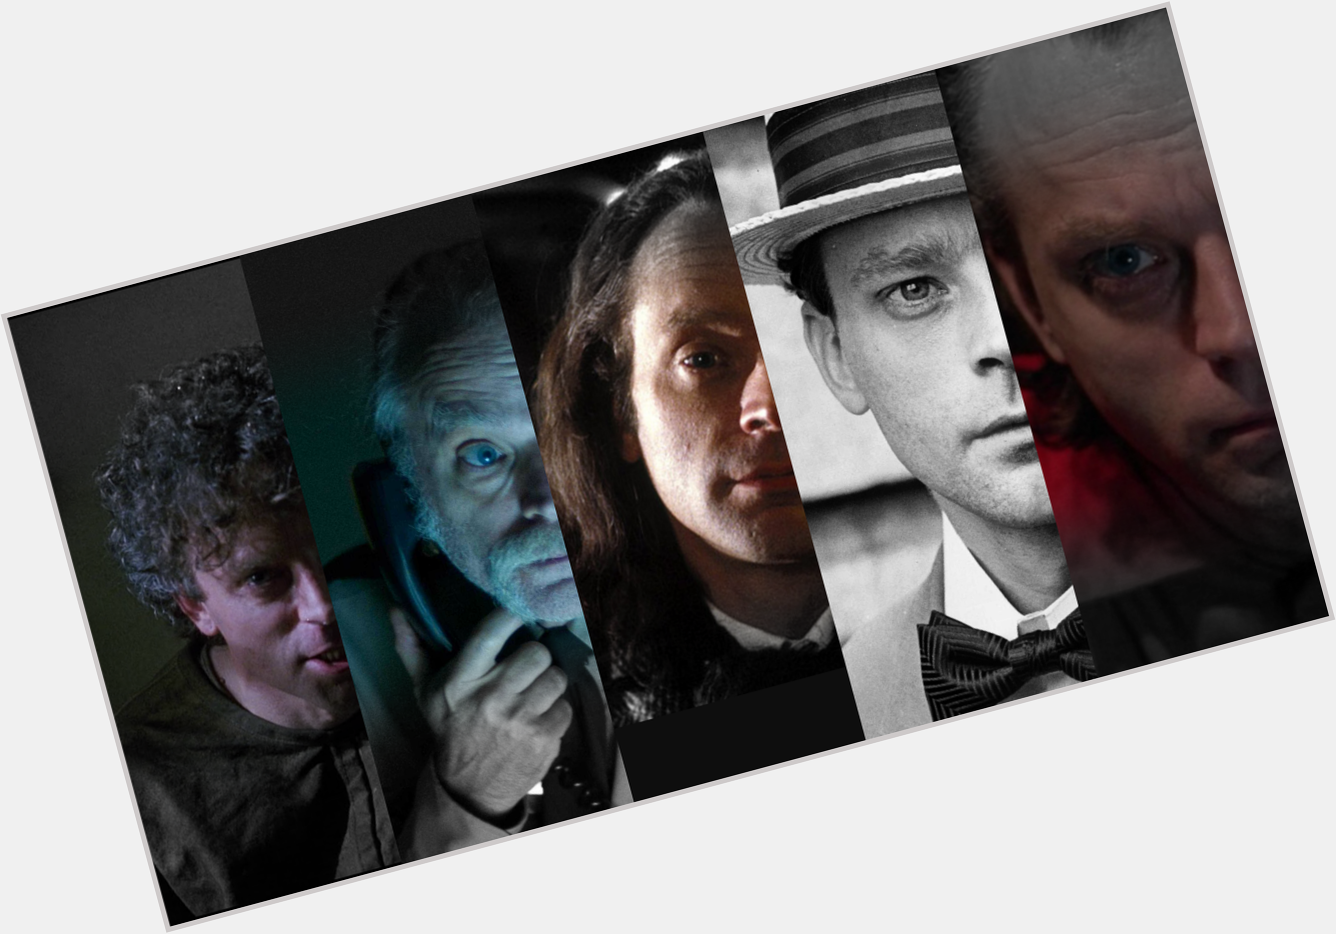 So many incredible characters ... one unforgettable actor. HL wishes a VERY Happy Birthday to Brad Dourif. (Martyn) 